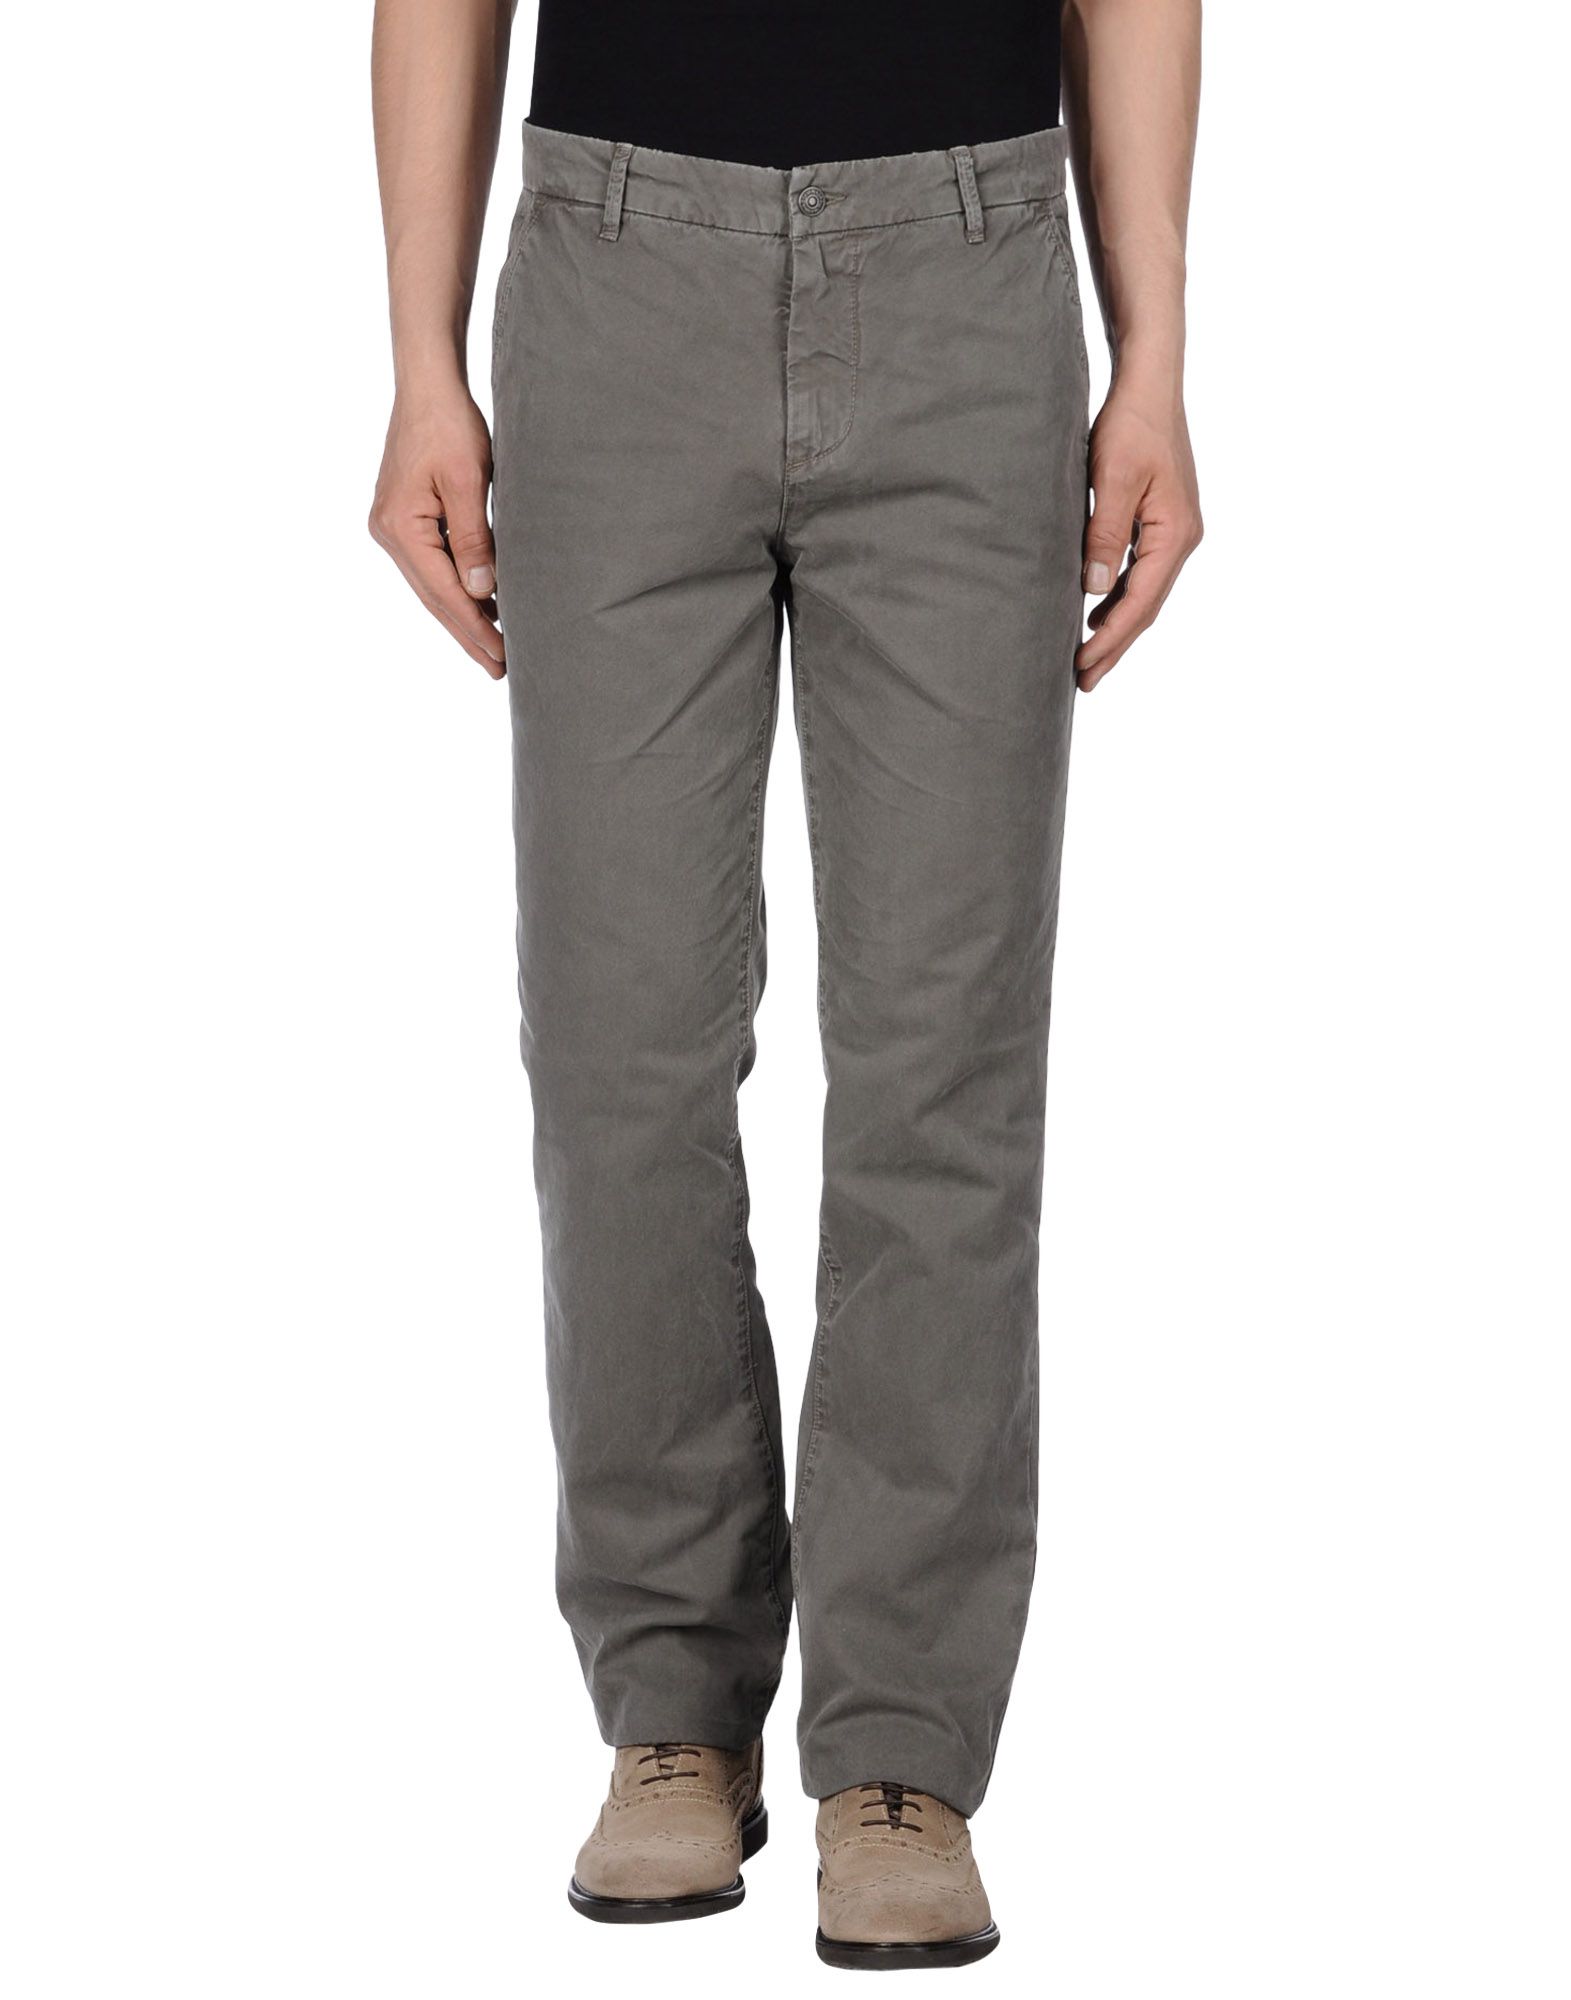 Foto 7 For All Mankind Pantalones Hombre Gris